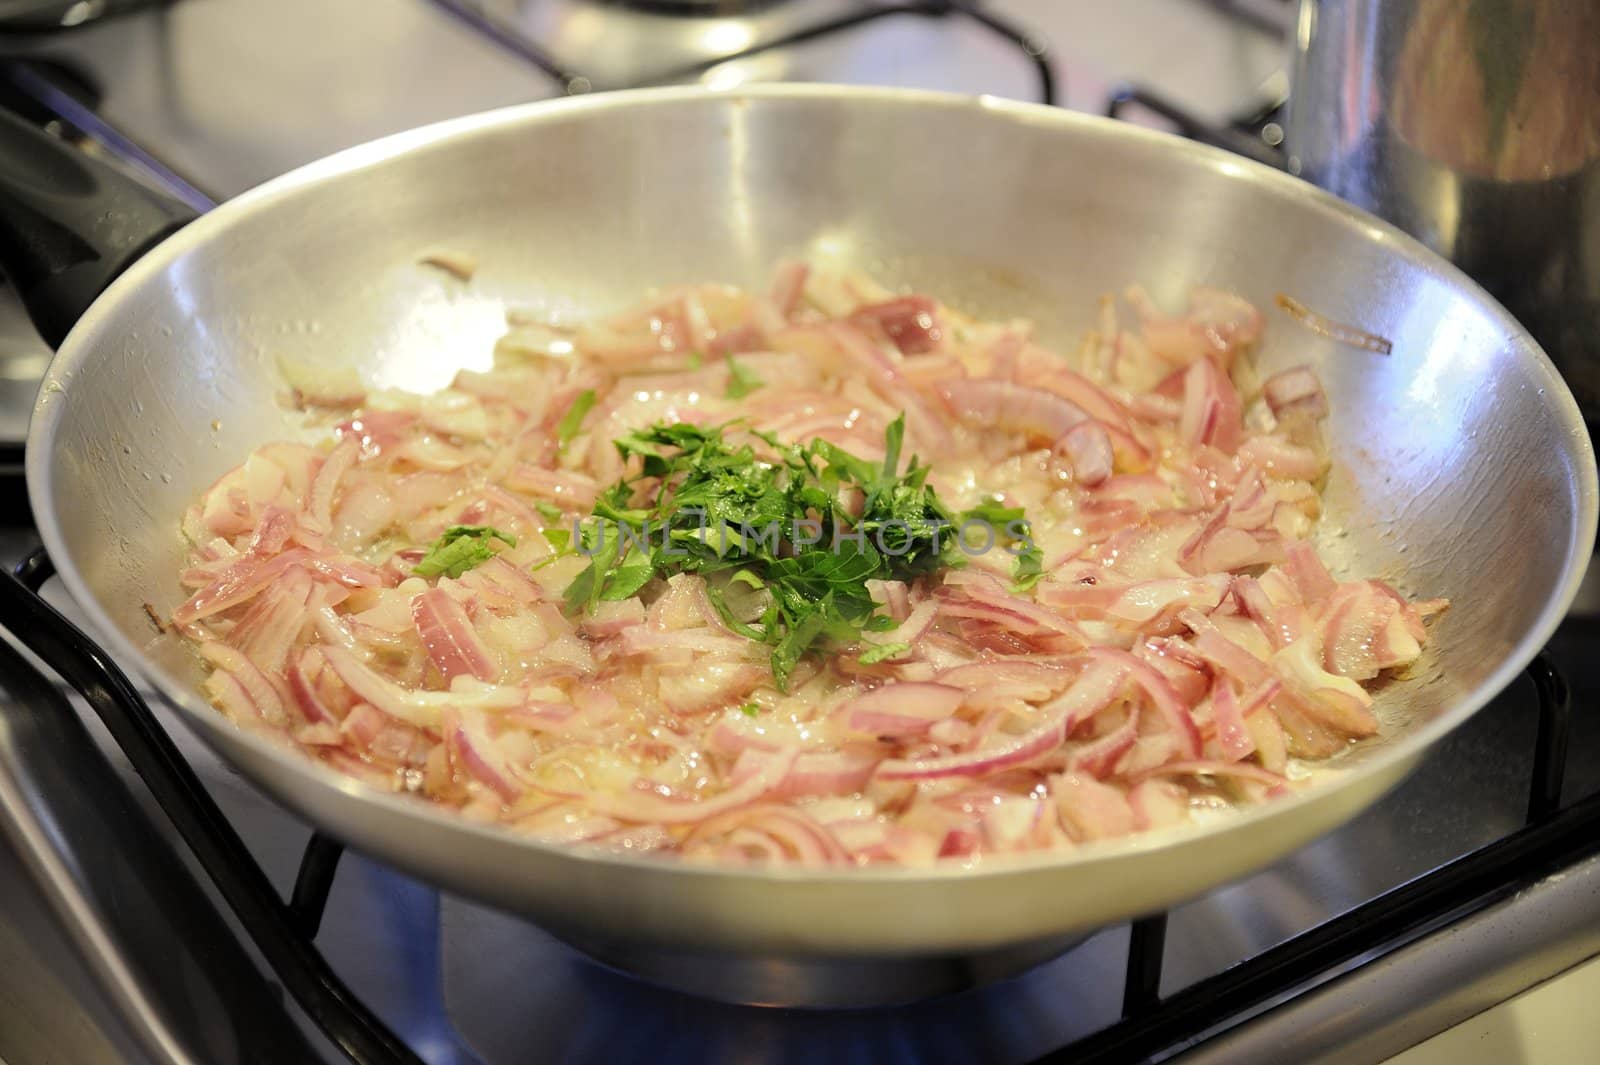 The preparation of the sauce for a french appetizer